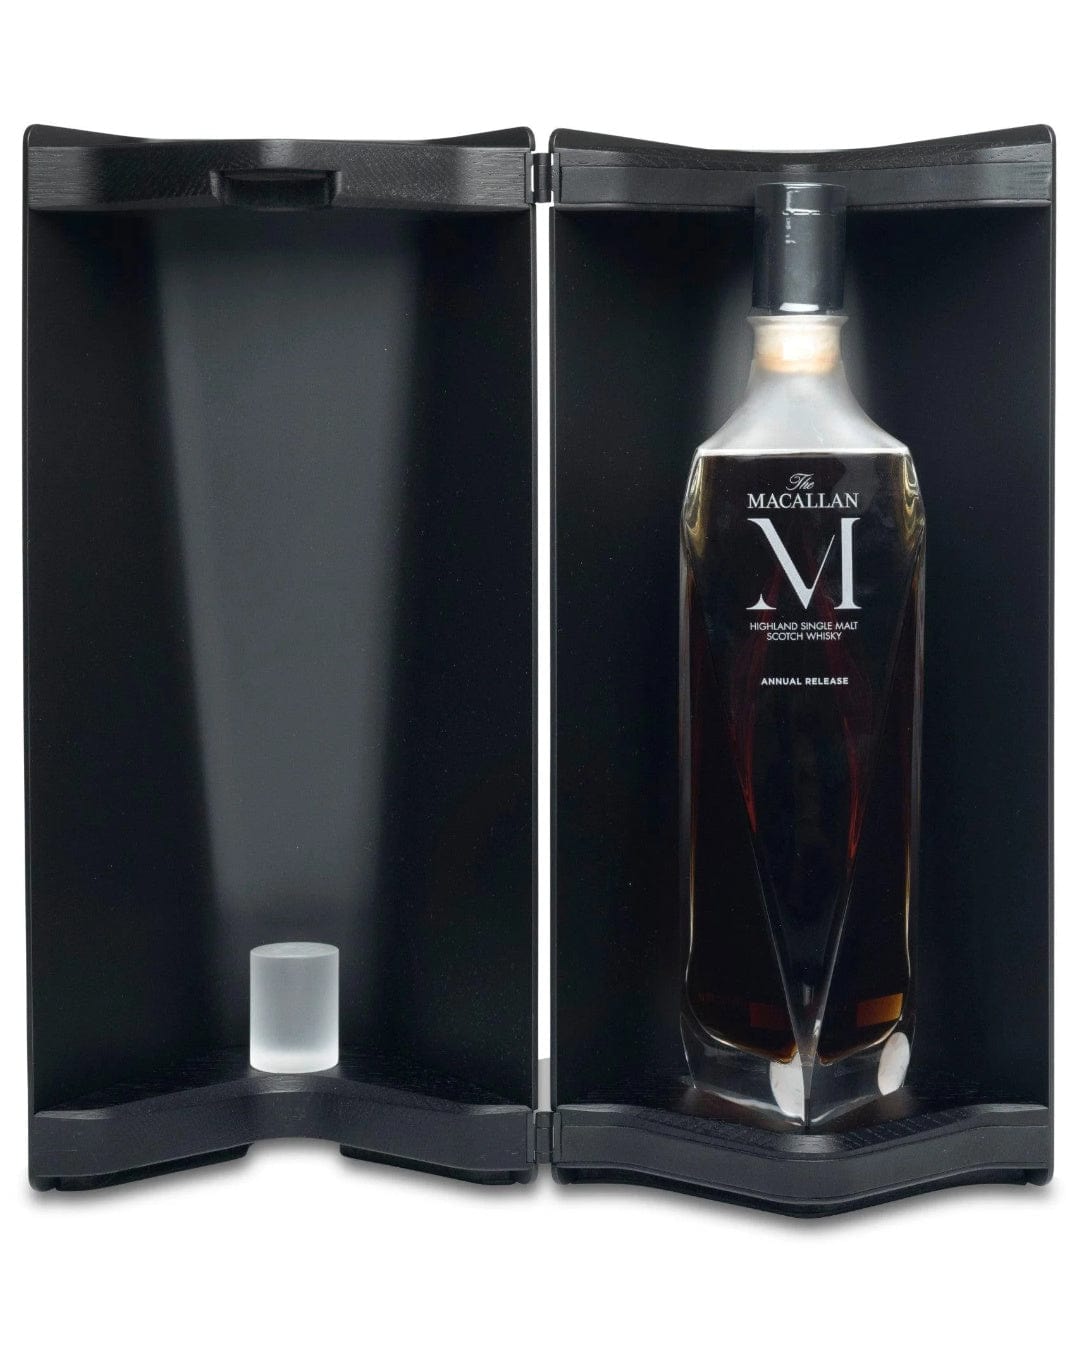 The Macallan M Decanter Release 2022 Whisky, 70 cl Whisky